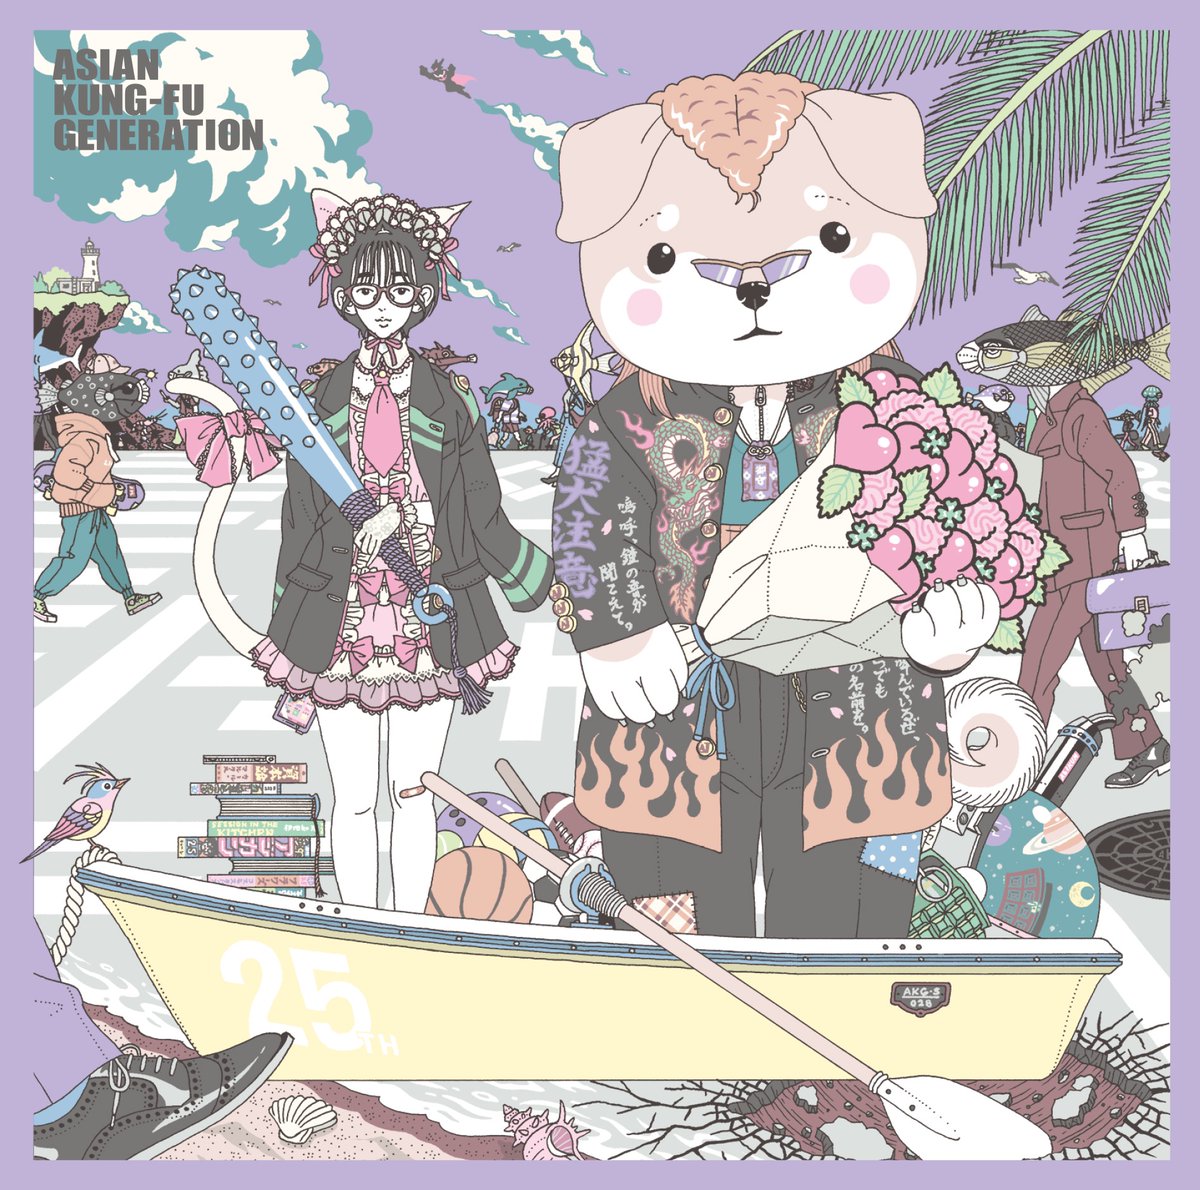 Cover for『ASIAN KUNG-FU GENERATION - Flowers』from the release『Empathy』